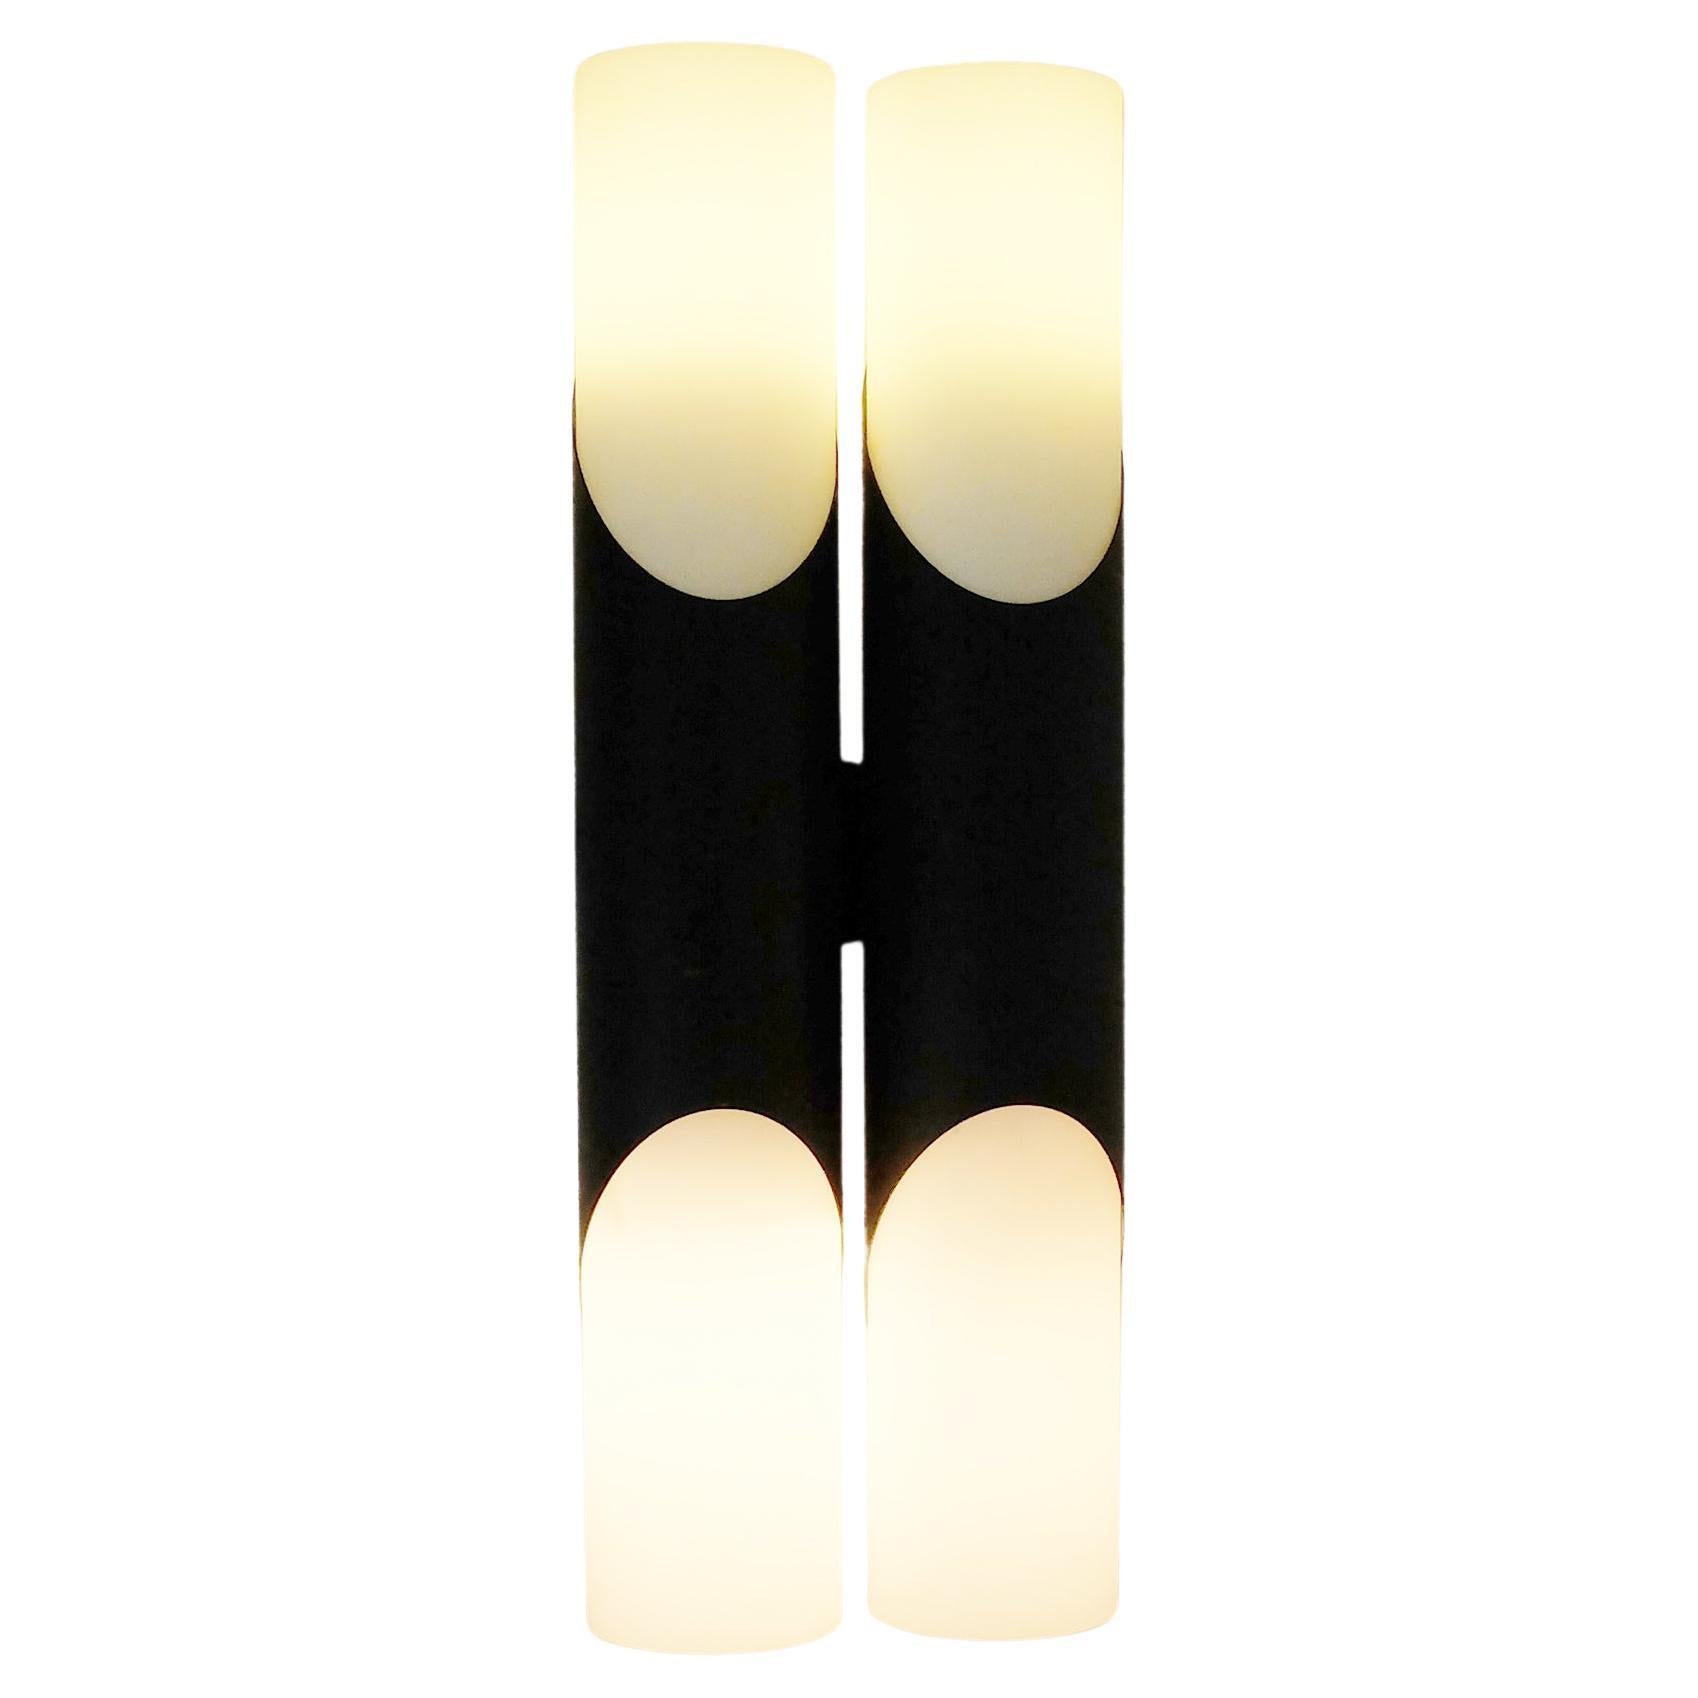 Double Glass Wall Light in black by Rolf Krüger for Paul Neuhaus, Germany 1970